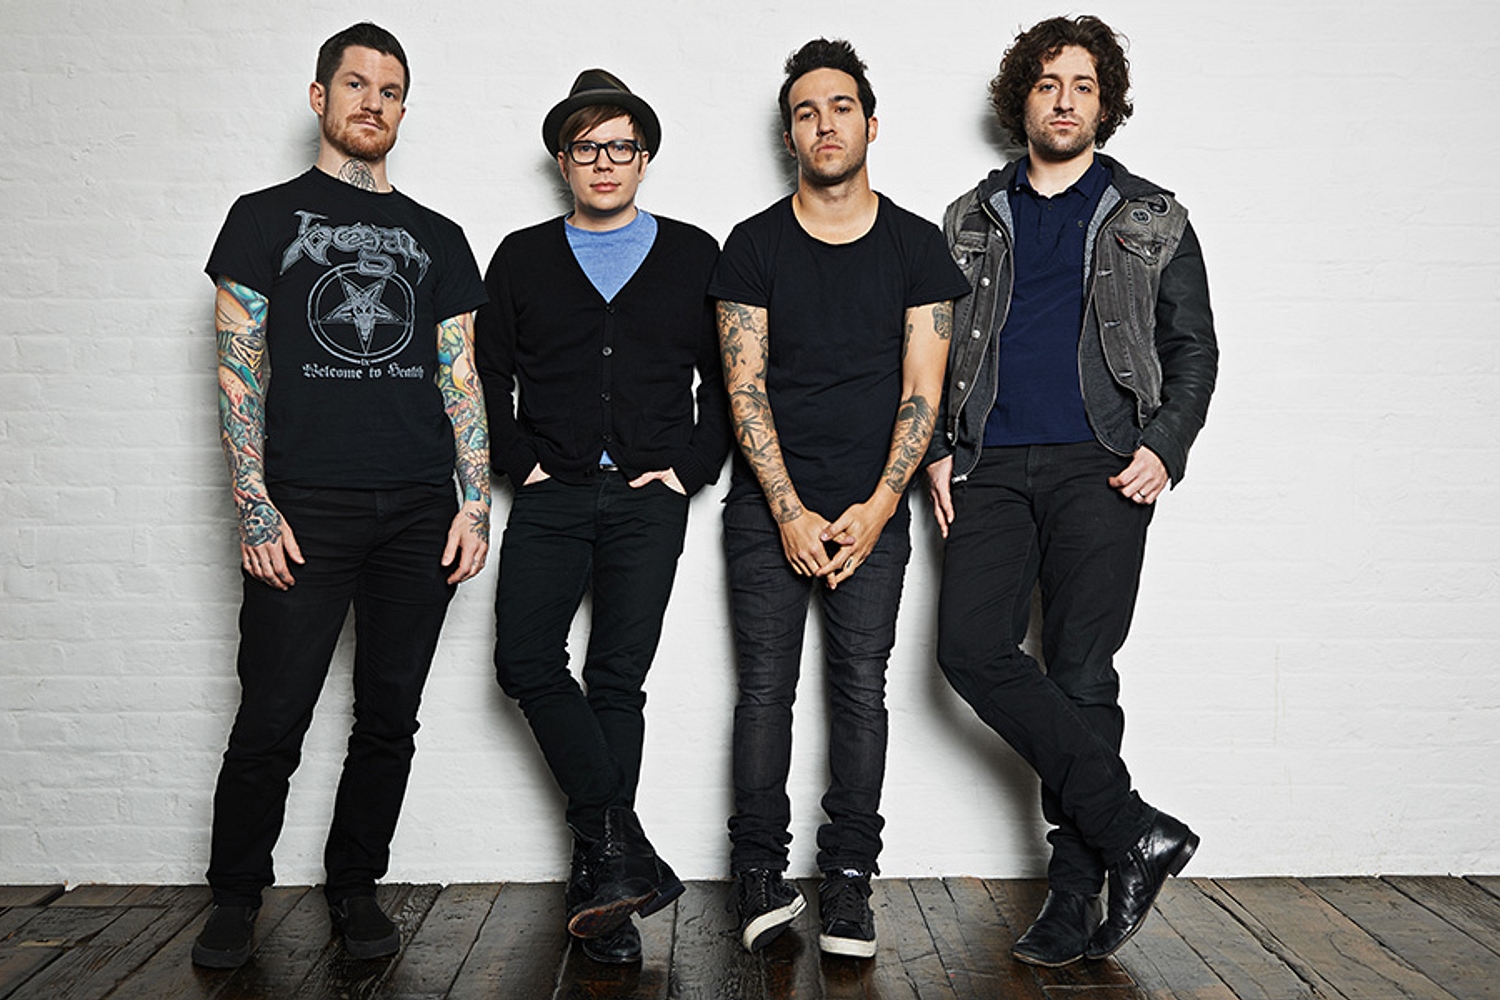 Have Fall Out Boy confirmed their new single, or more?